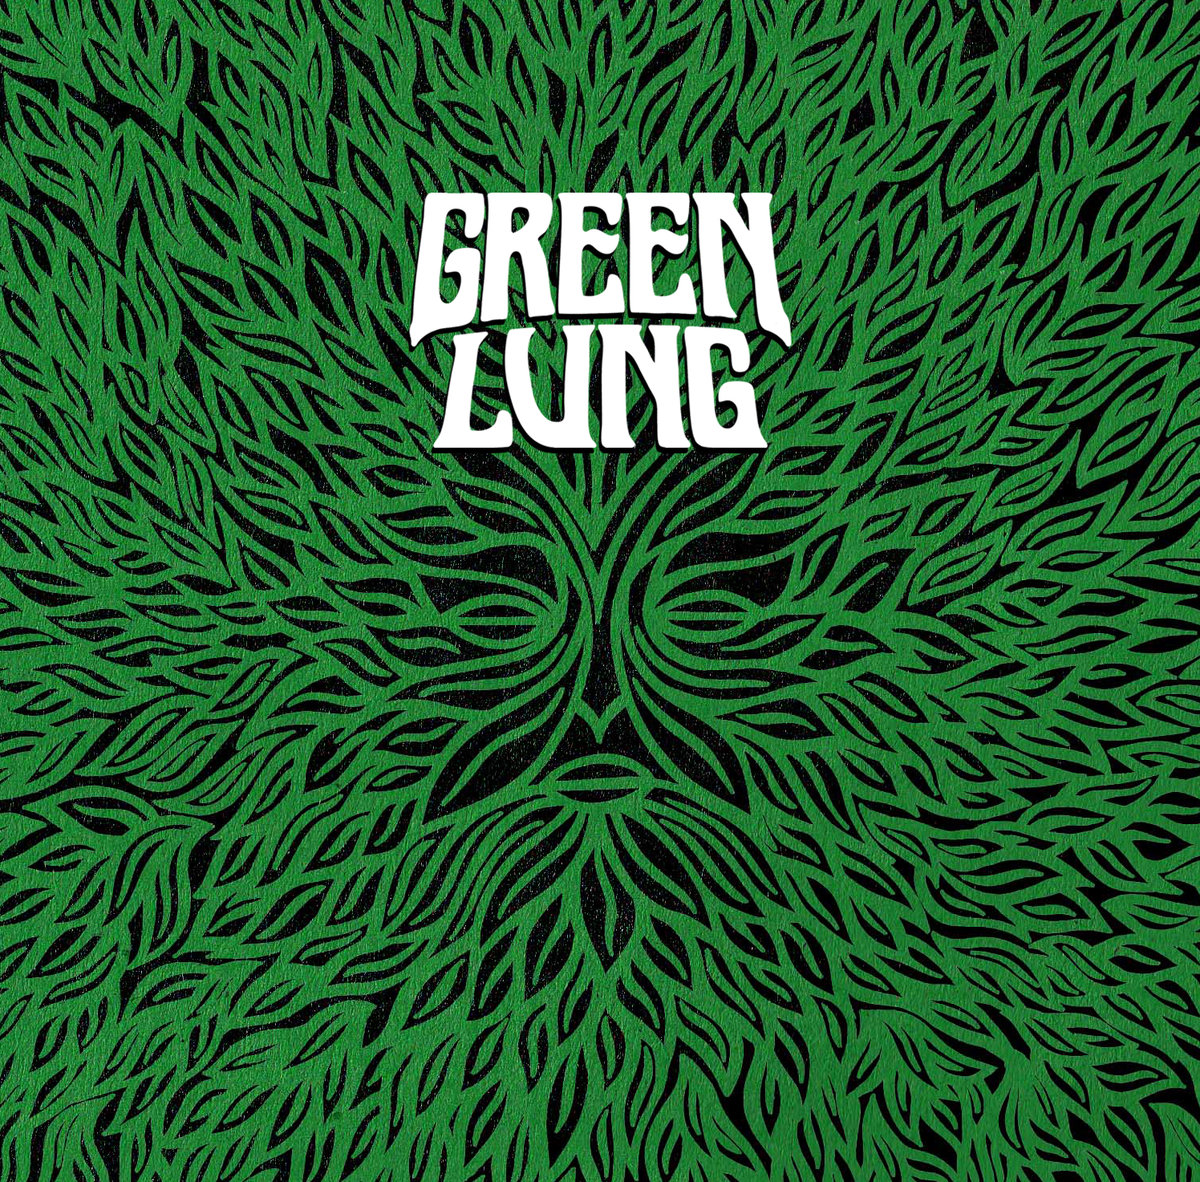 bison Email Flyve drage GREEN LUNG - sign with Svart Records & announce European tour dates  #greenlung - KICK ASS Forever